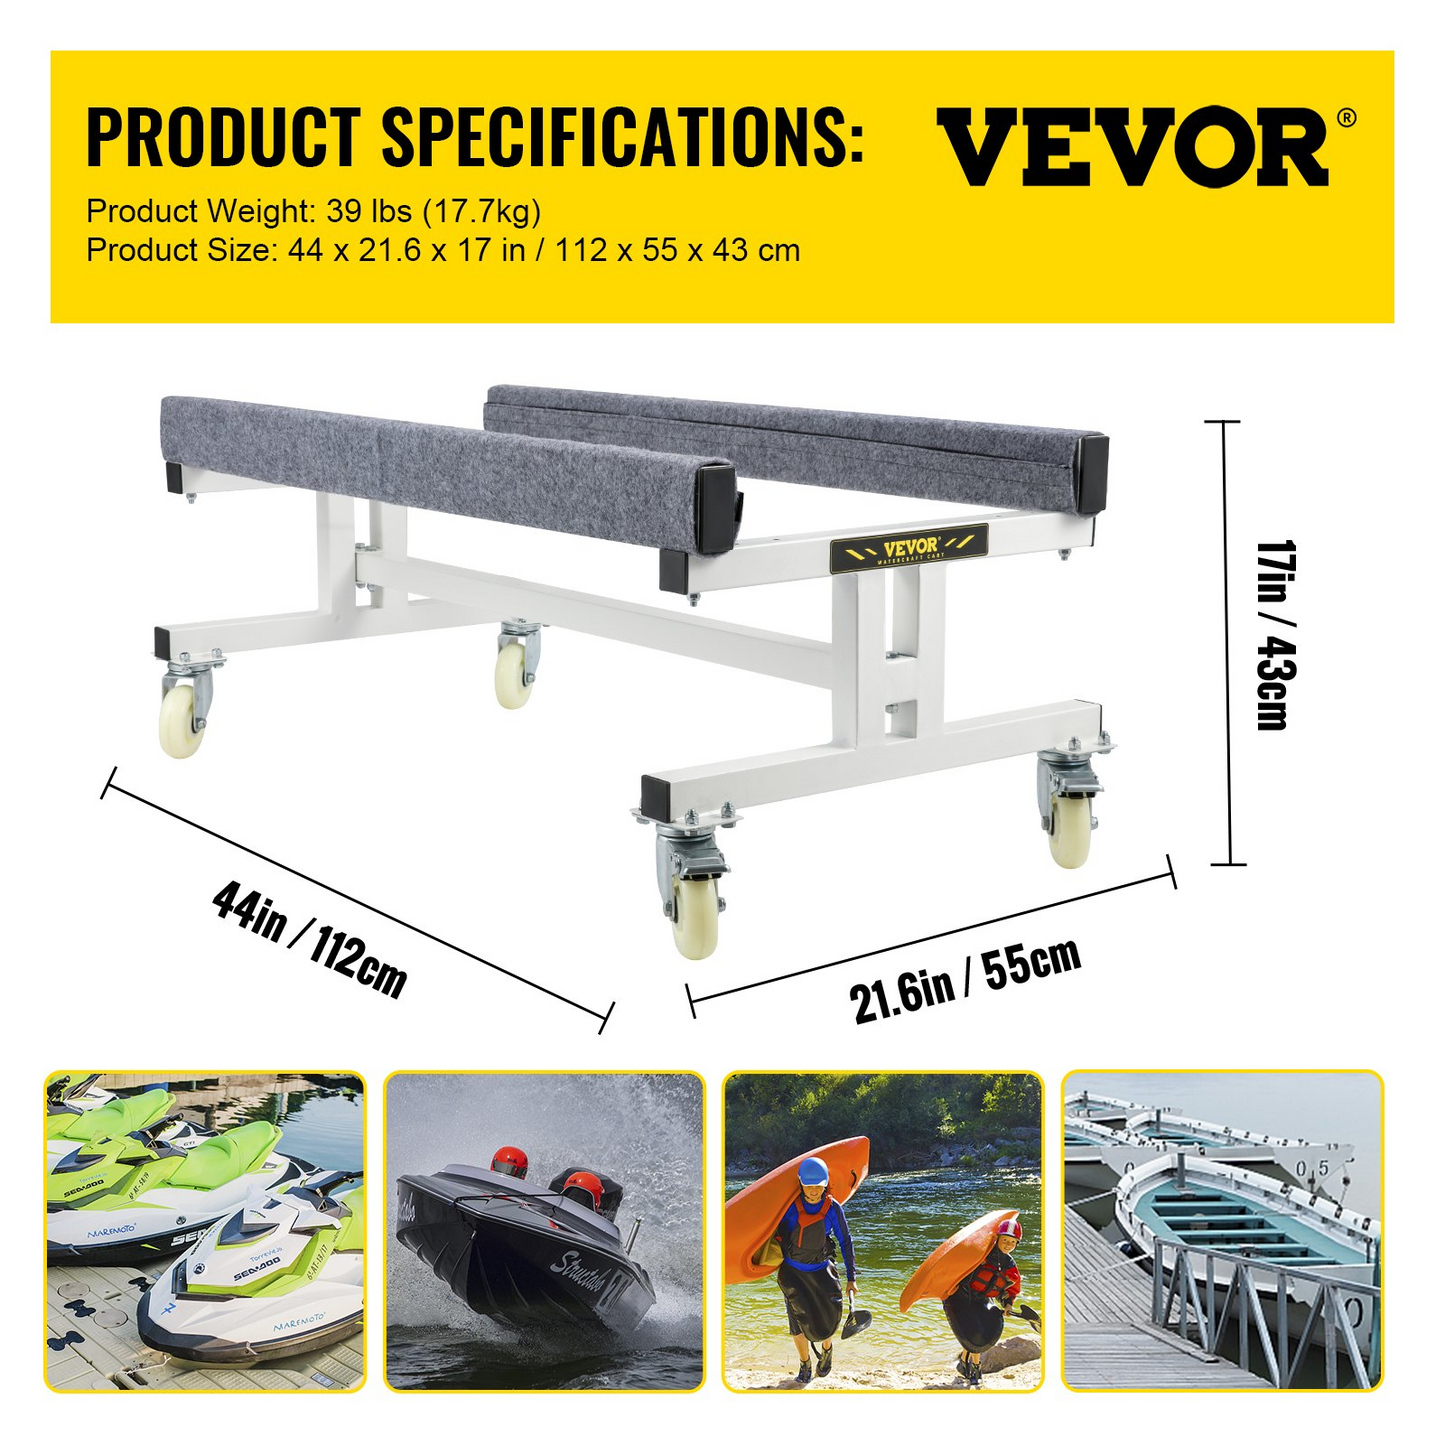 VEVOR Watercraft PWC Dolly, 1300 LBS Capacity Jet Ski Stand, Adjustable Width Boat Storage Trailer with Four Casters & Two Brakes, Watercraft Cart for Ski Fishing Boat Sailboat, Goodies N Stuff